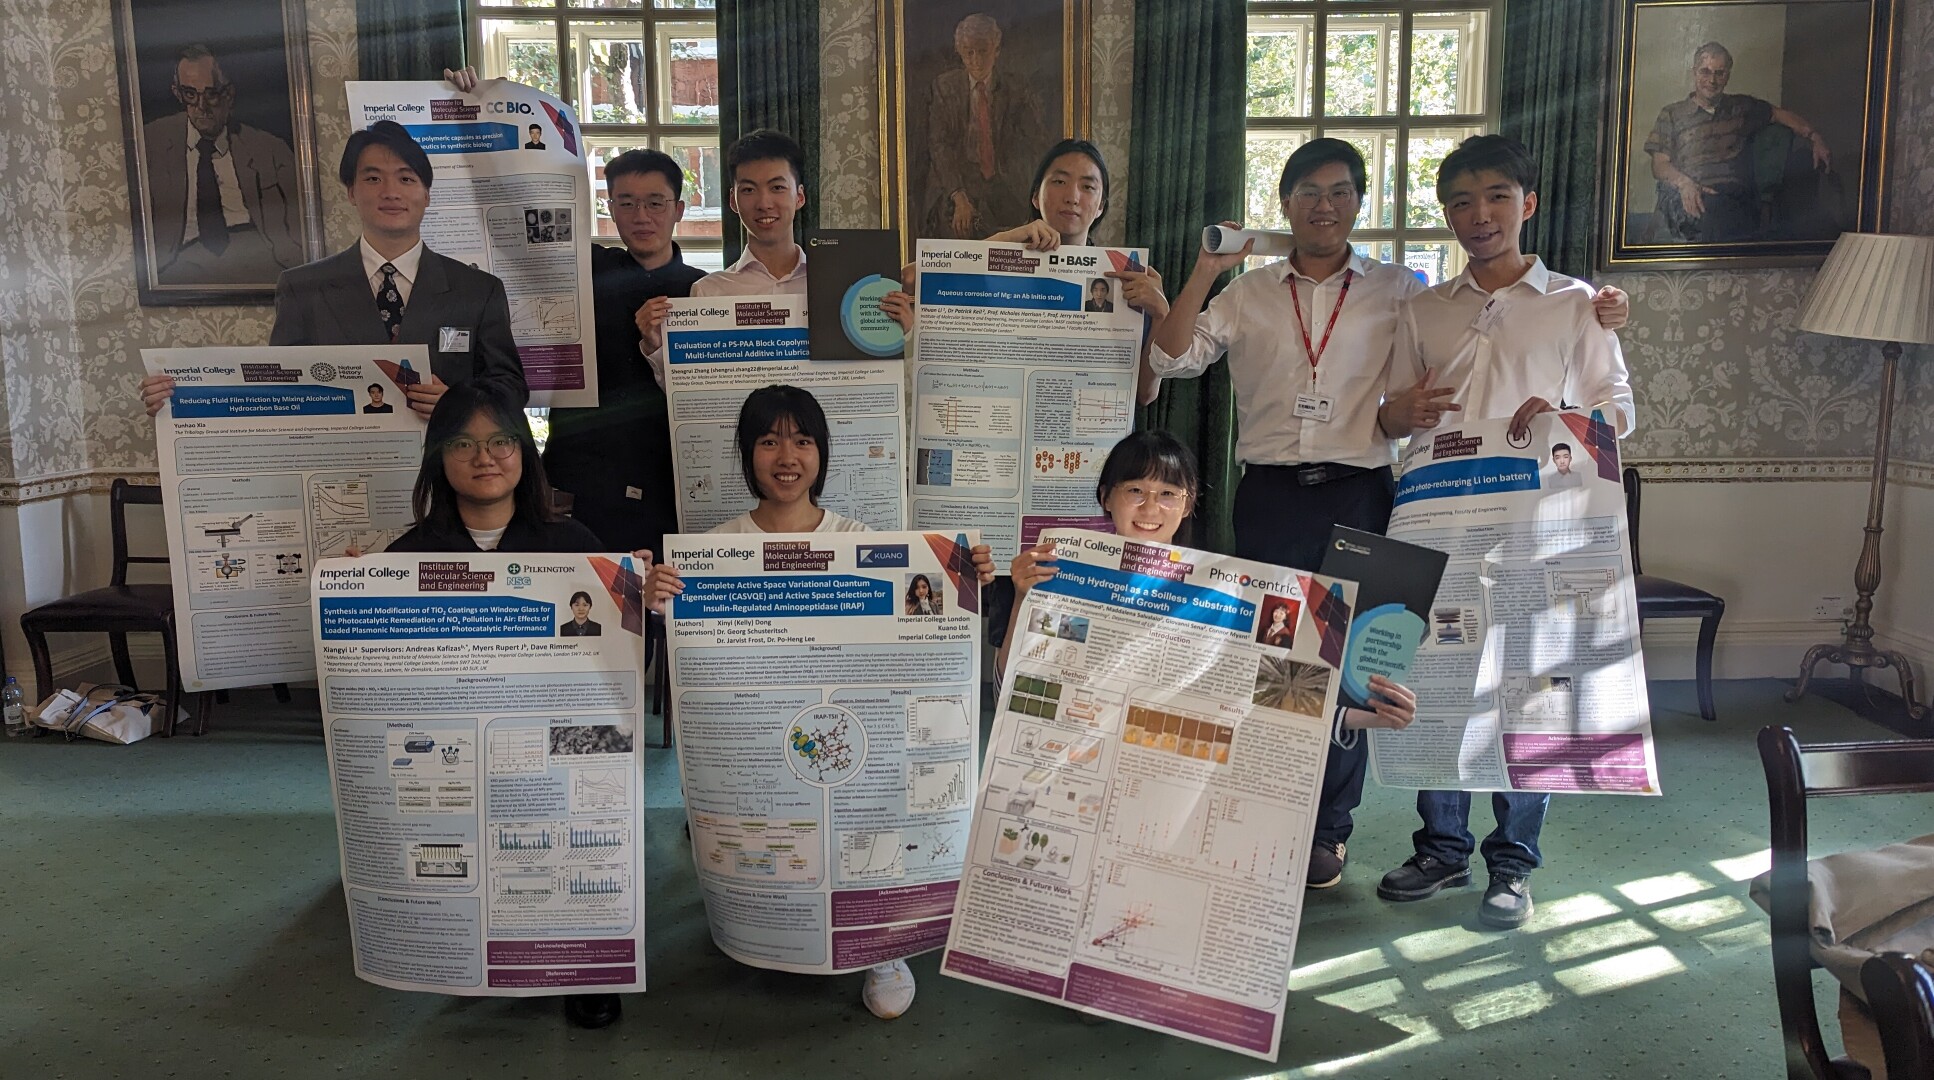 IMSE MRes Students with Posters